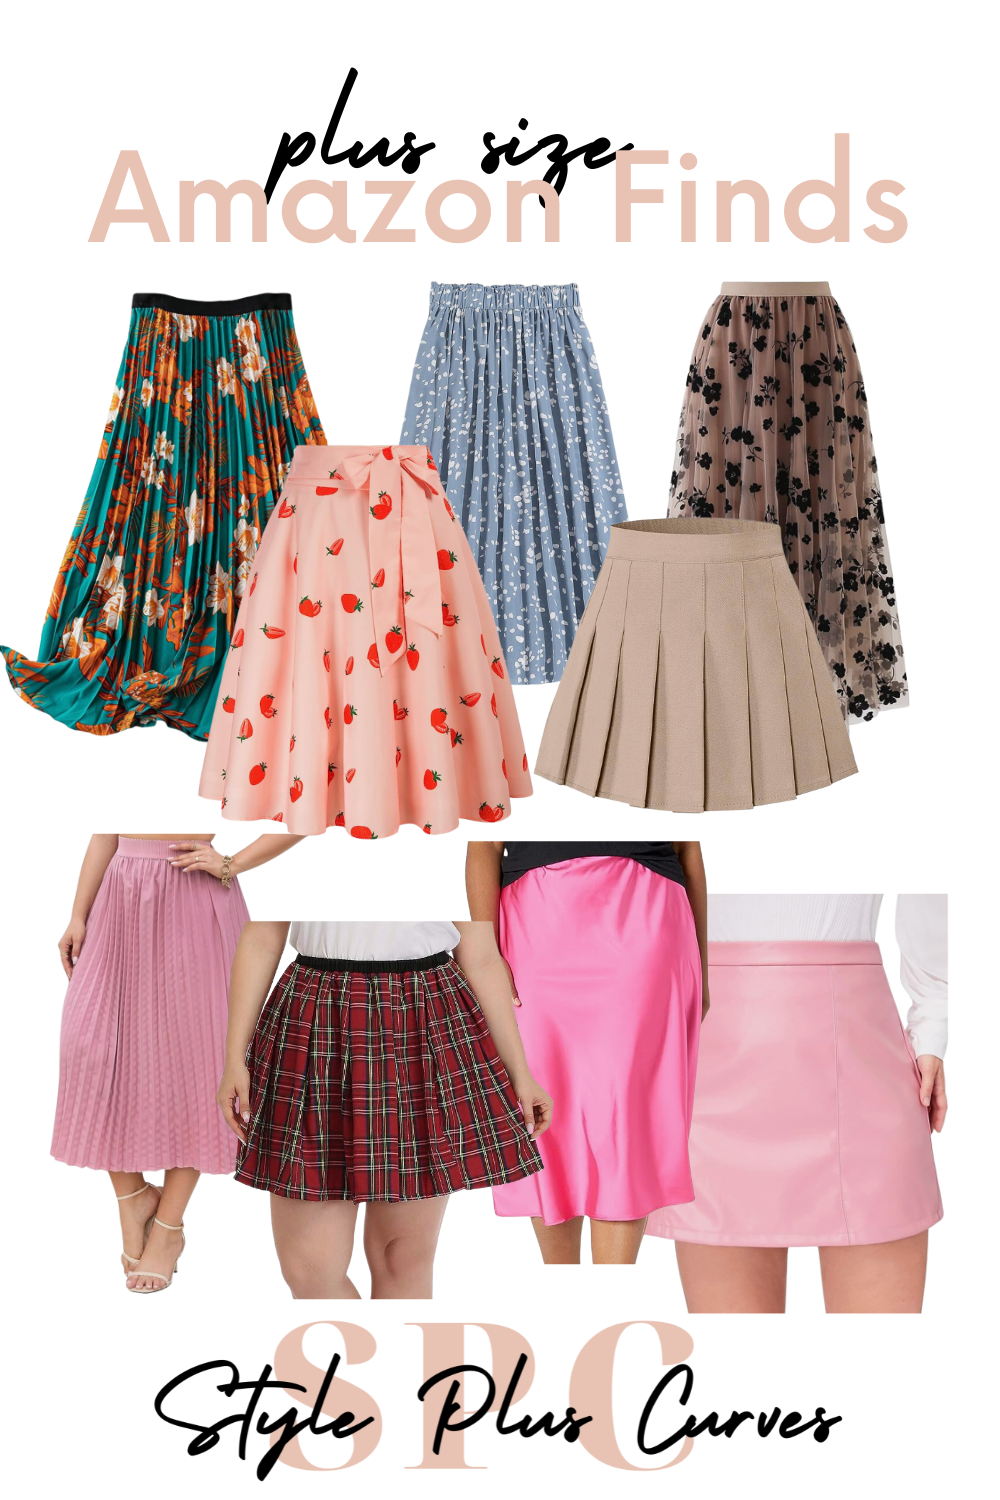 Plus Size Amazon Skirt Finds